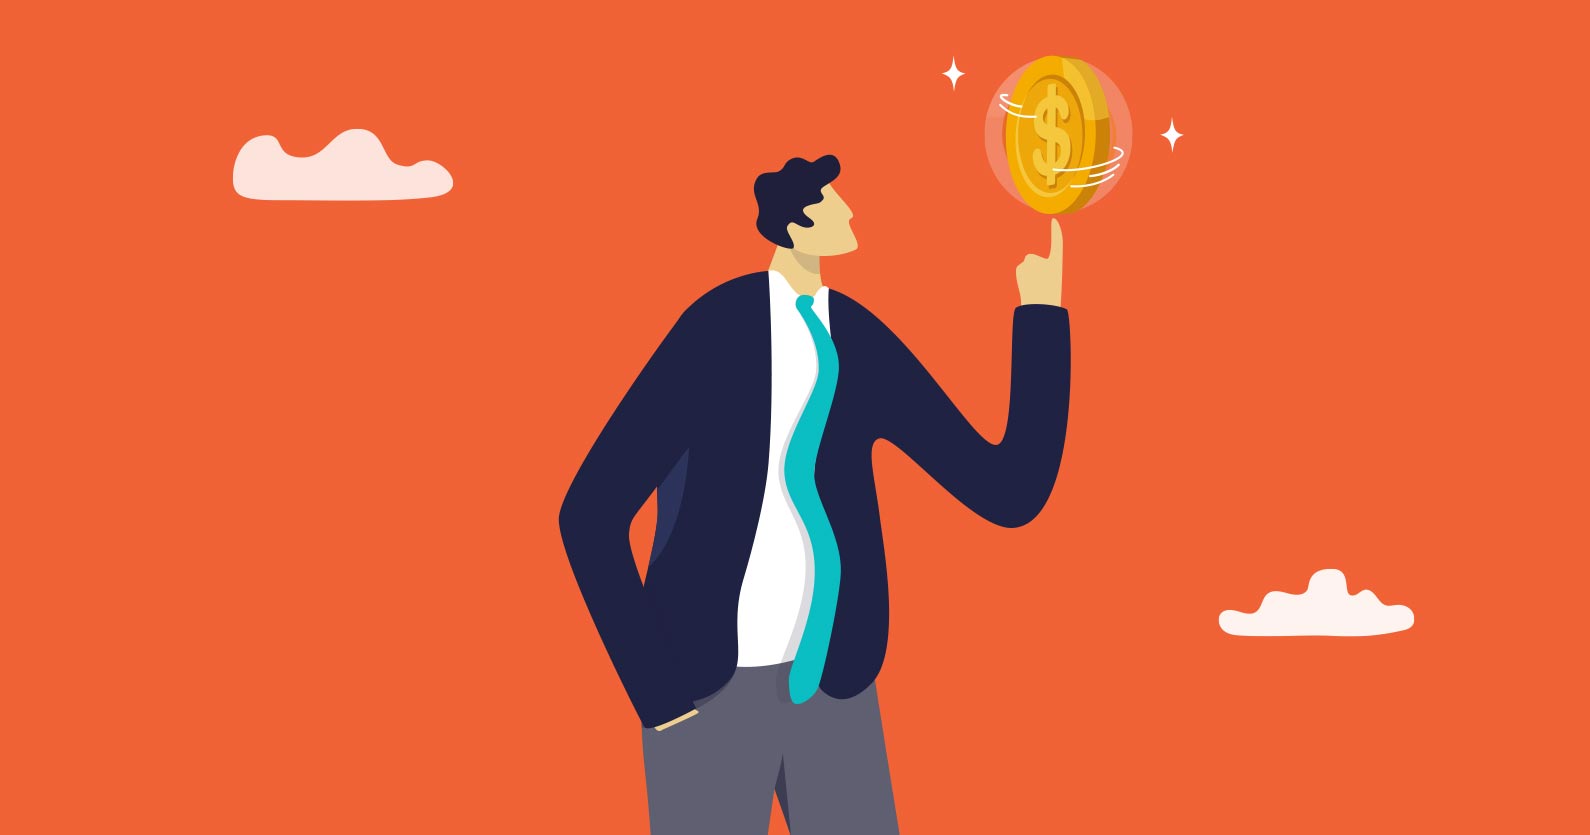 Low-cost digital marketing: Illustration showing a man spinning a coin on his finger 